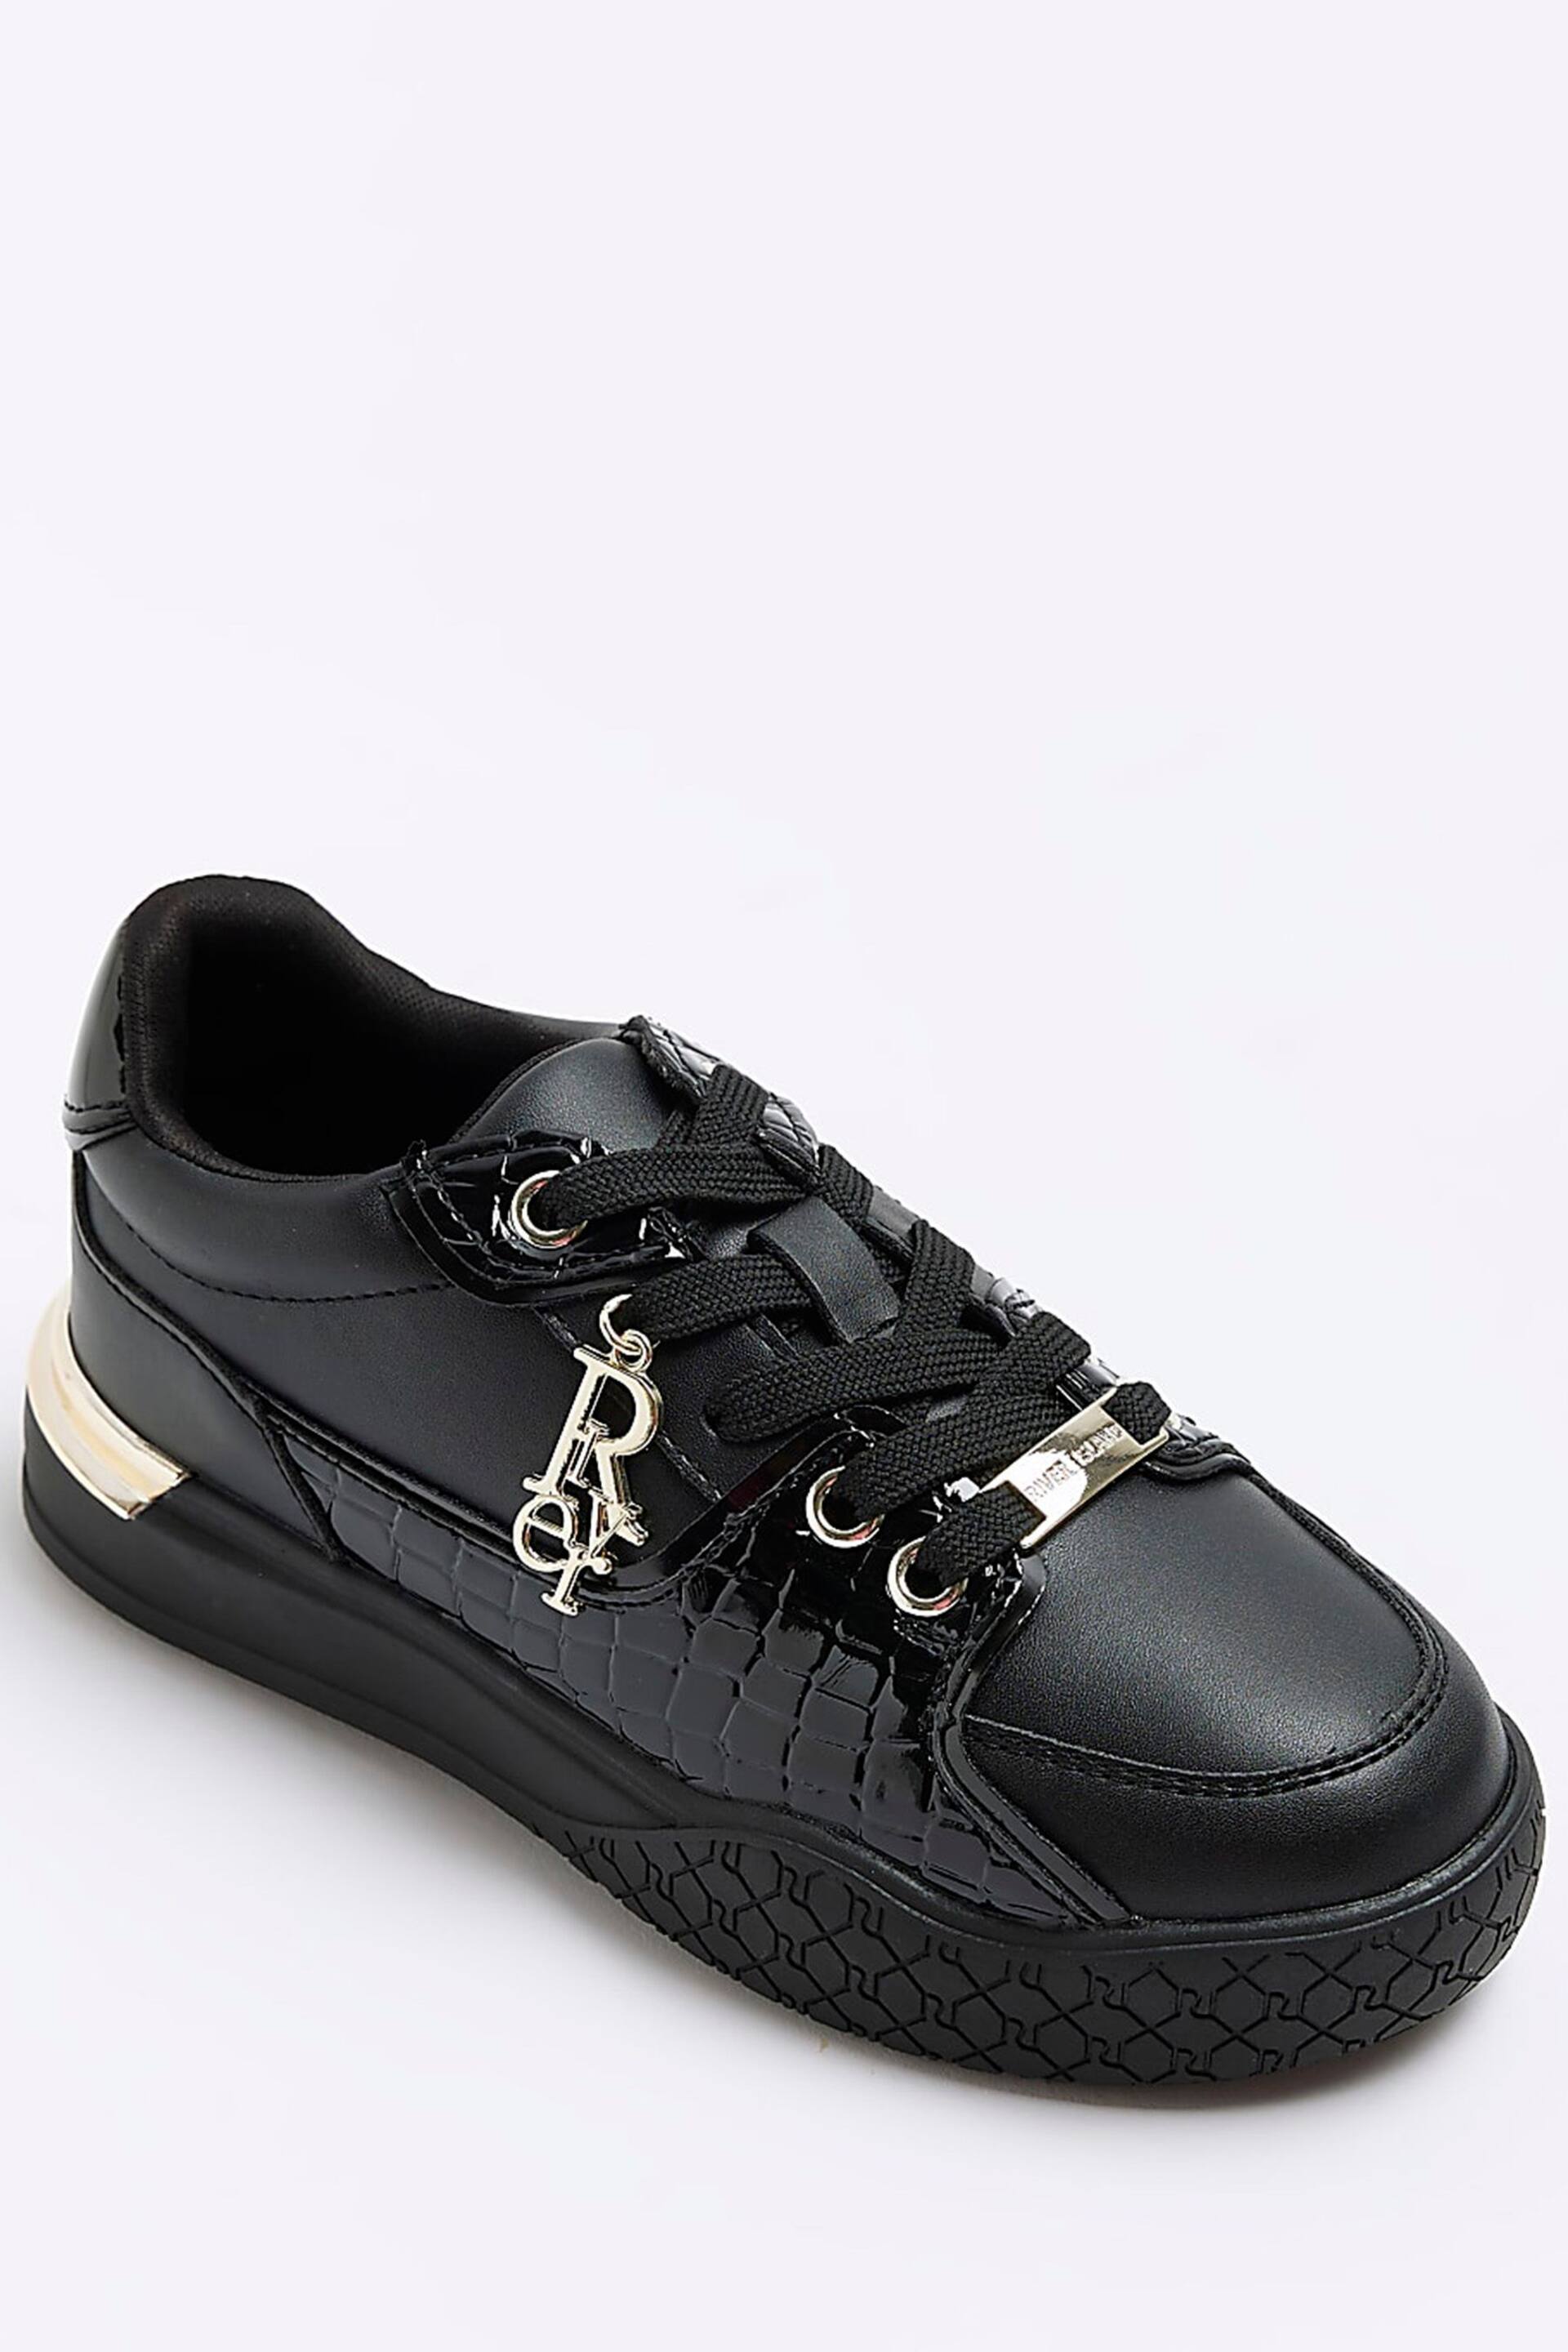 River Island Black Girls Croc Effect Patent Trainers - Image 5 of 5